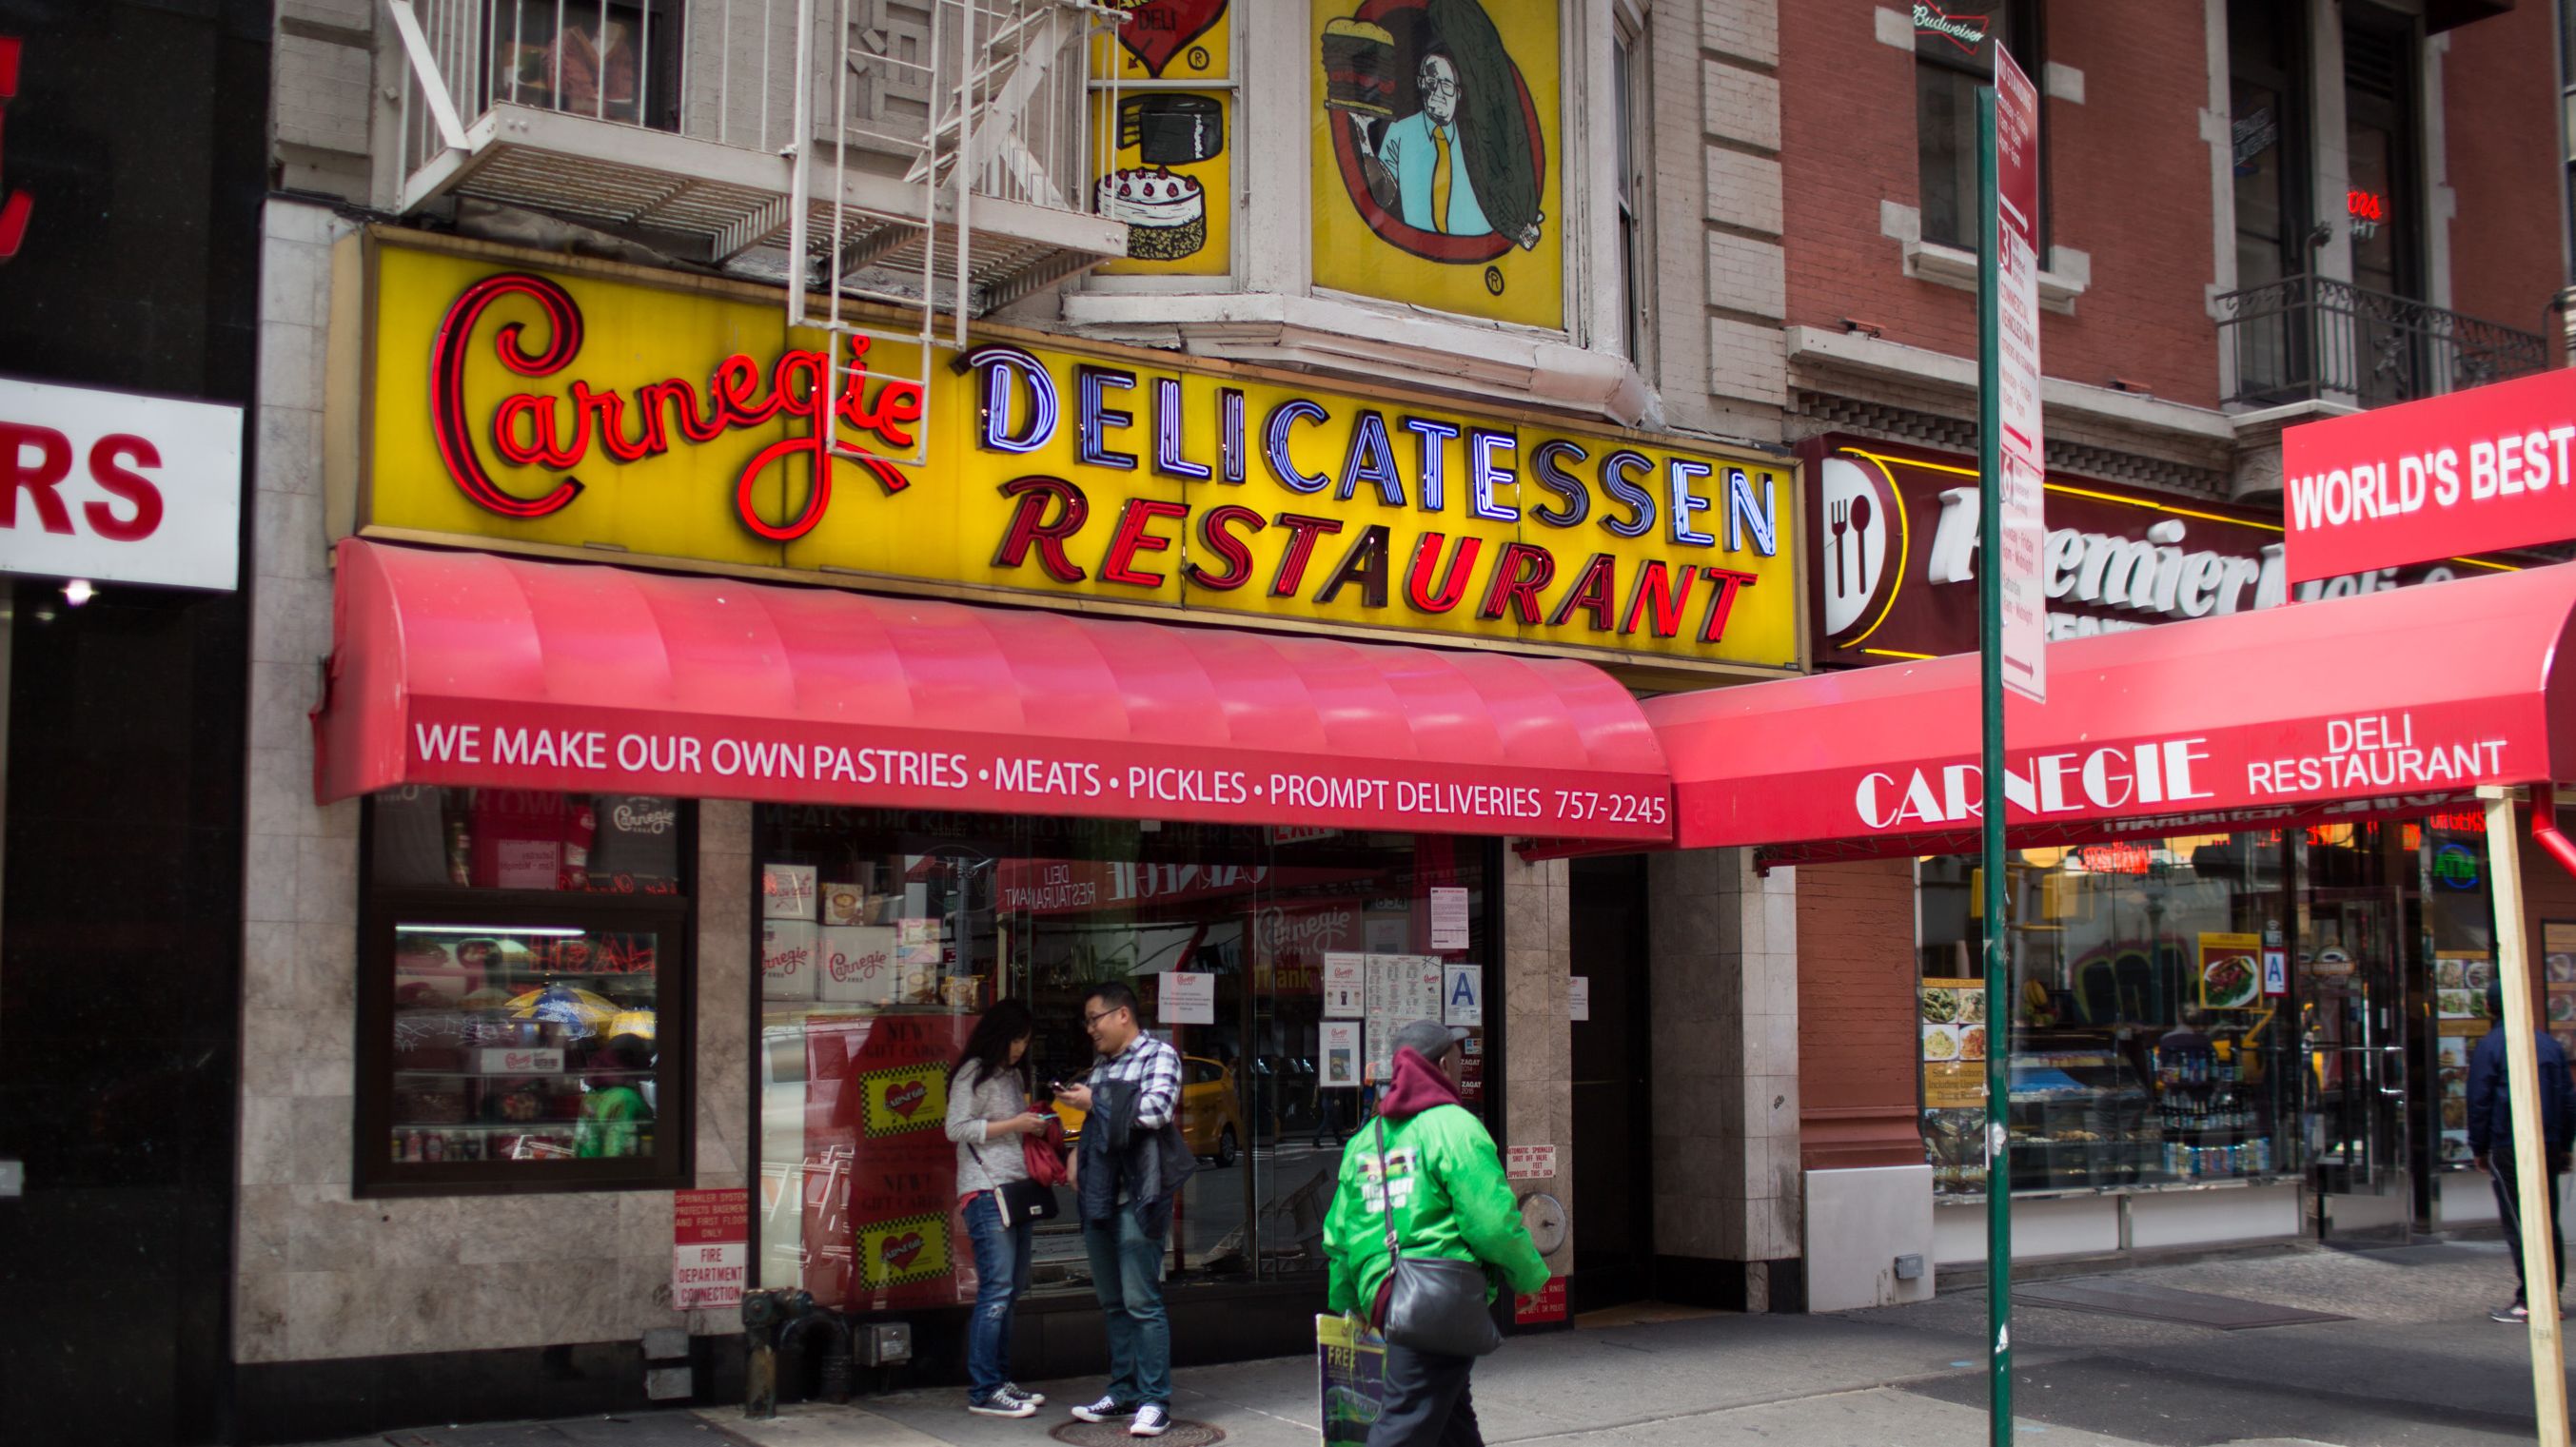 New York City S Legendary Carnegie Deli Is Reopening With 1950s Menu Prices Mental Floss